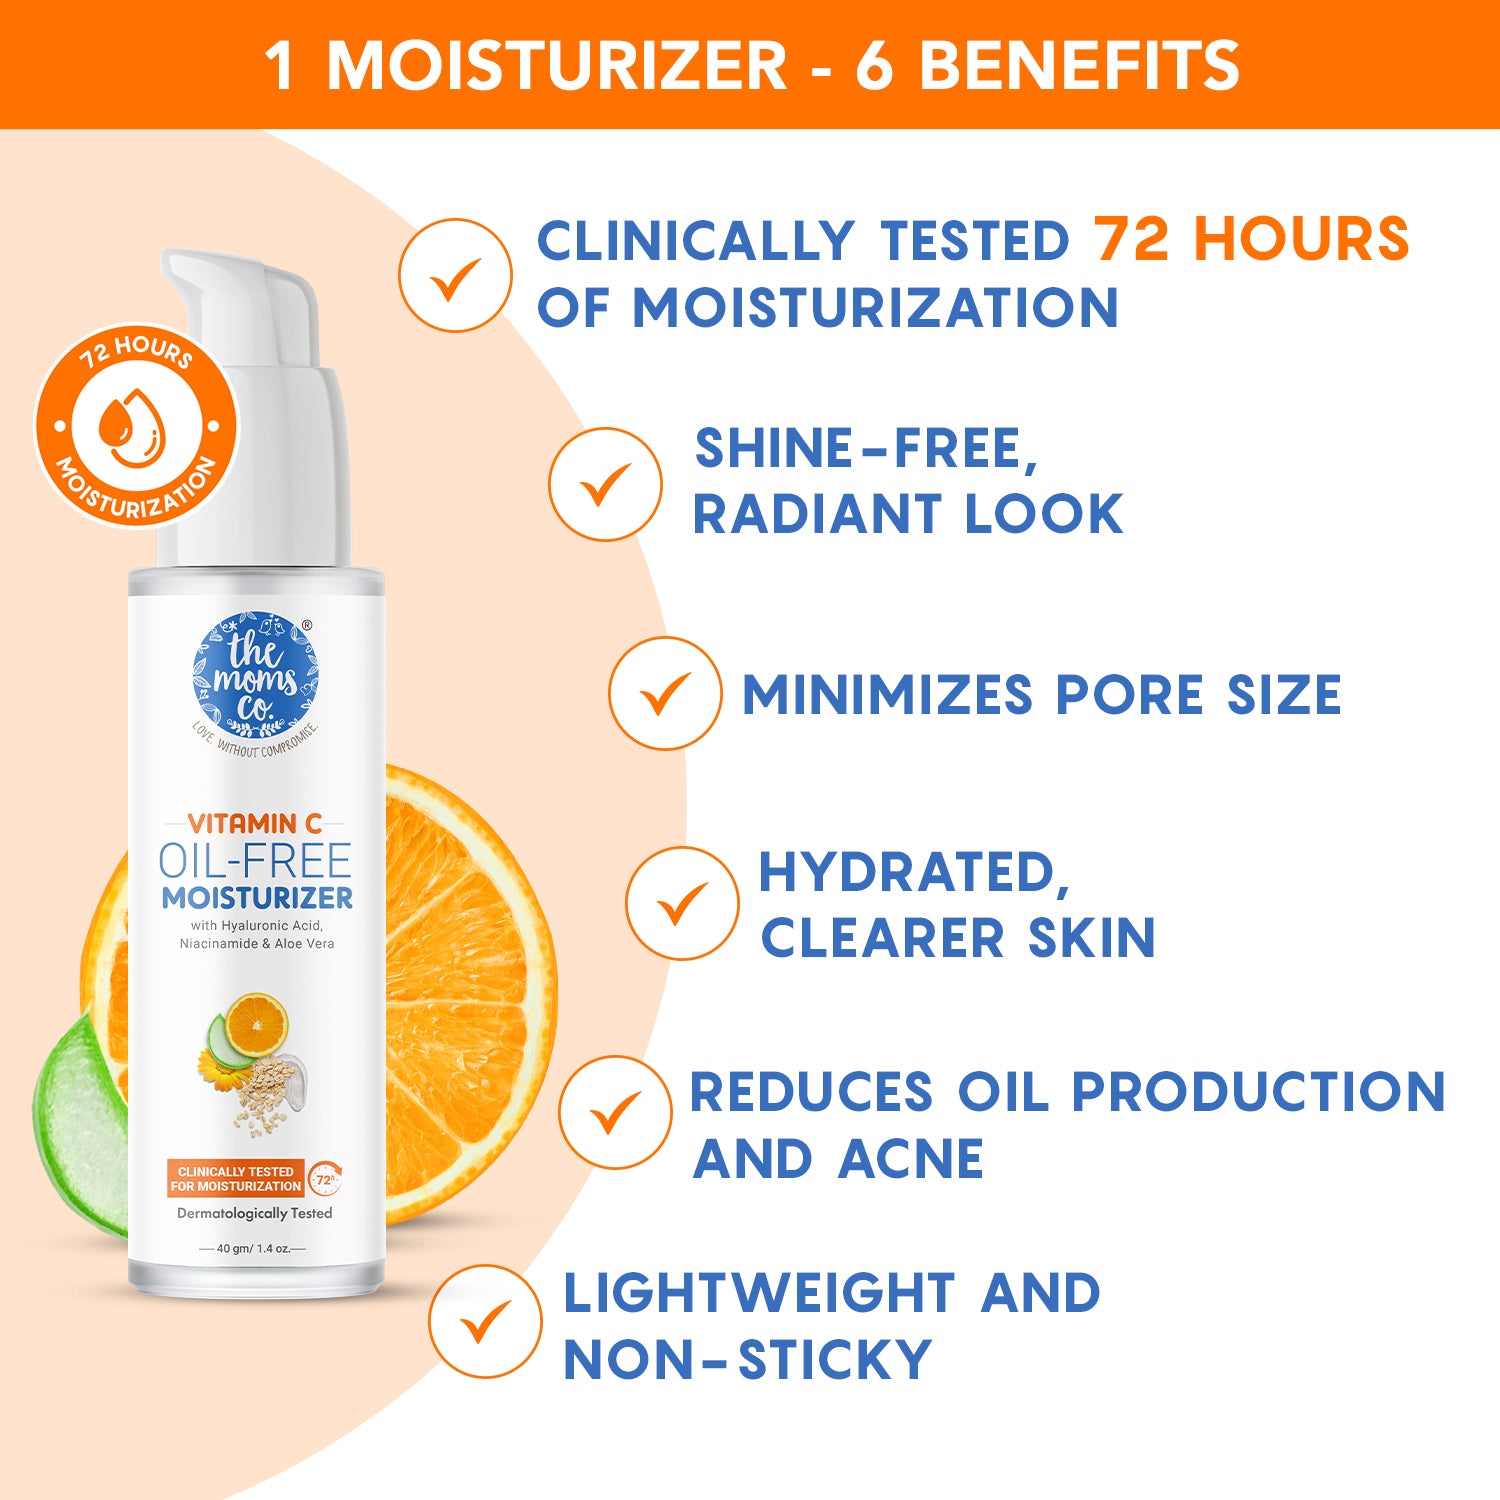 The Moms Co. Natural Vitamin C Oil-Free Moisturizer for Face| With Hyaluronic Acid, Niacinamide and Aloe Vera|Regulates Oil Production, Minimizes Acne & Controls Shine |For Women and Men 40g